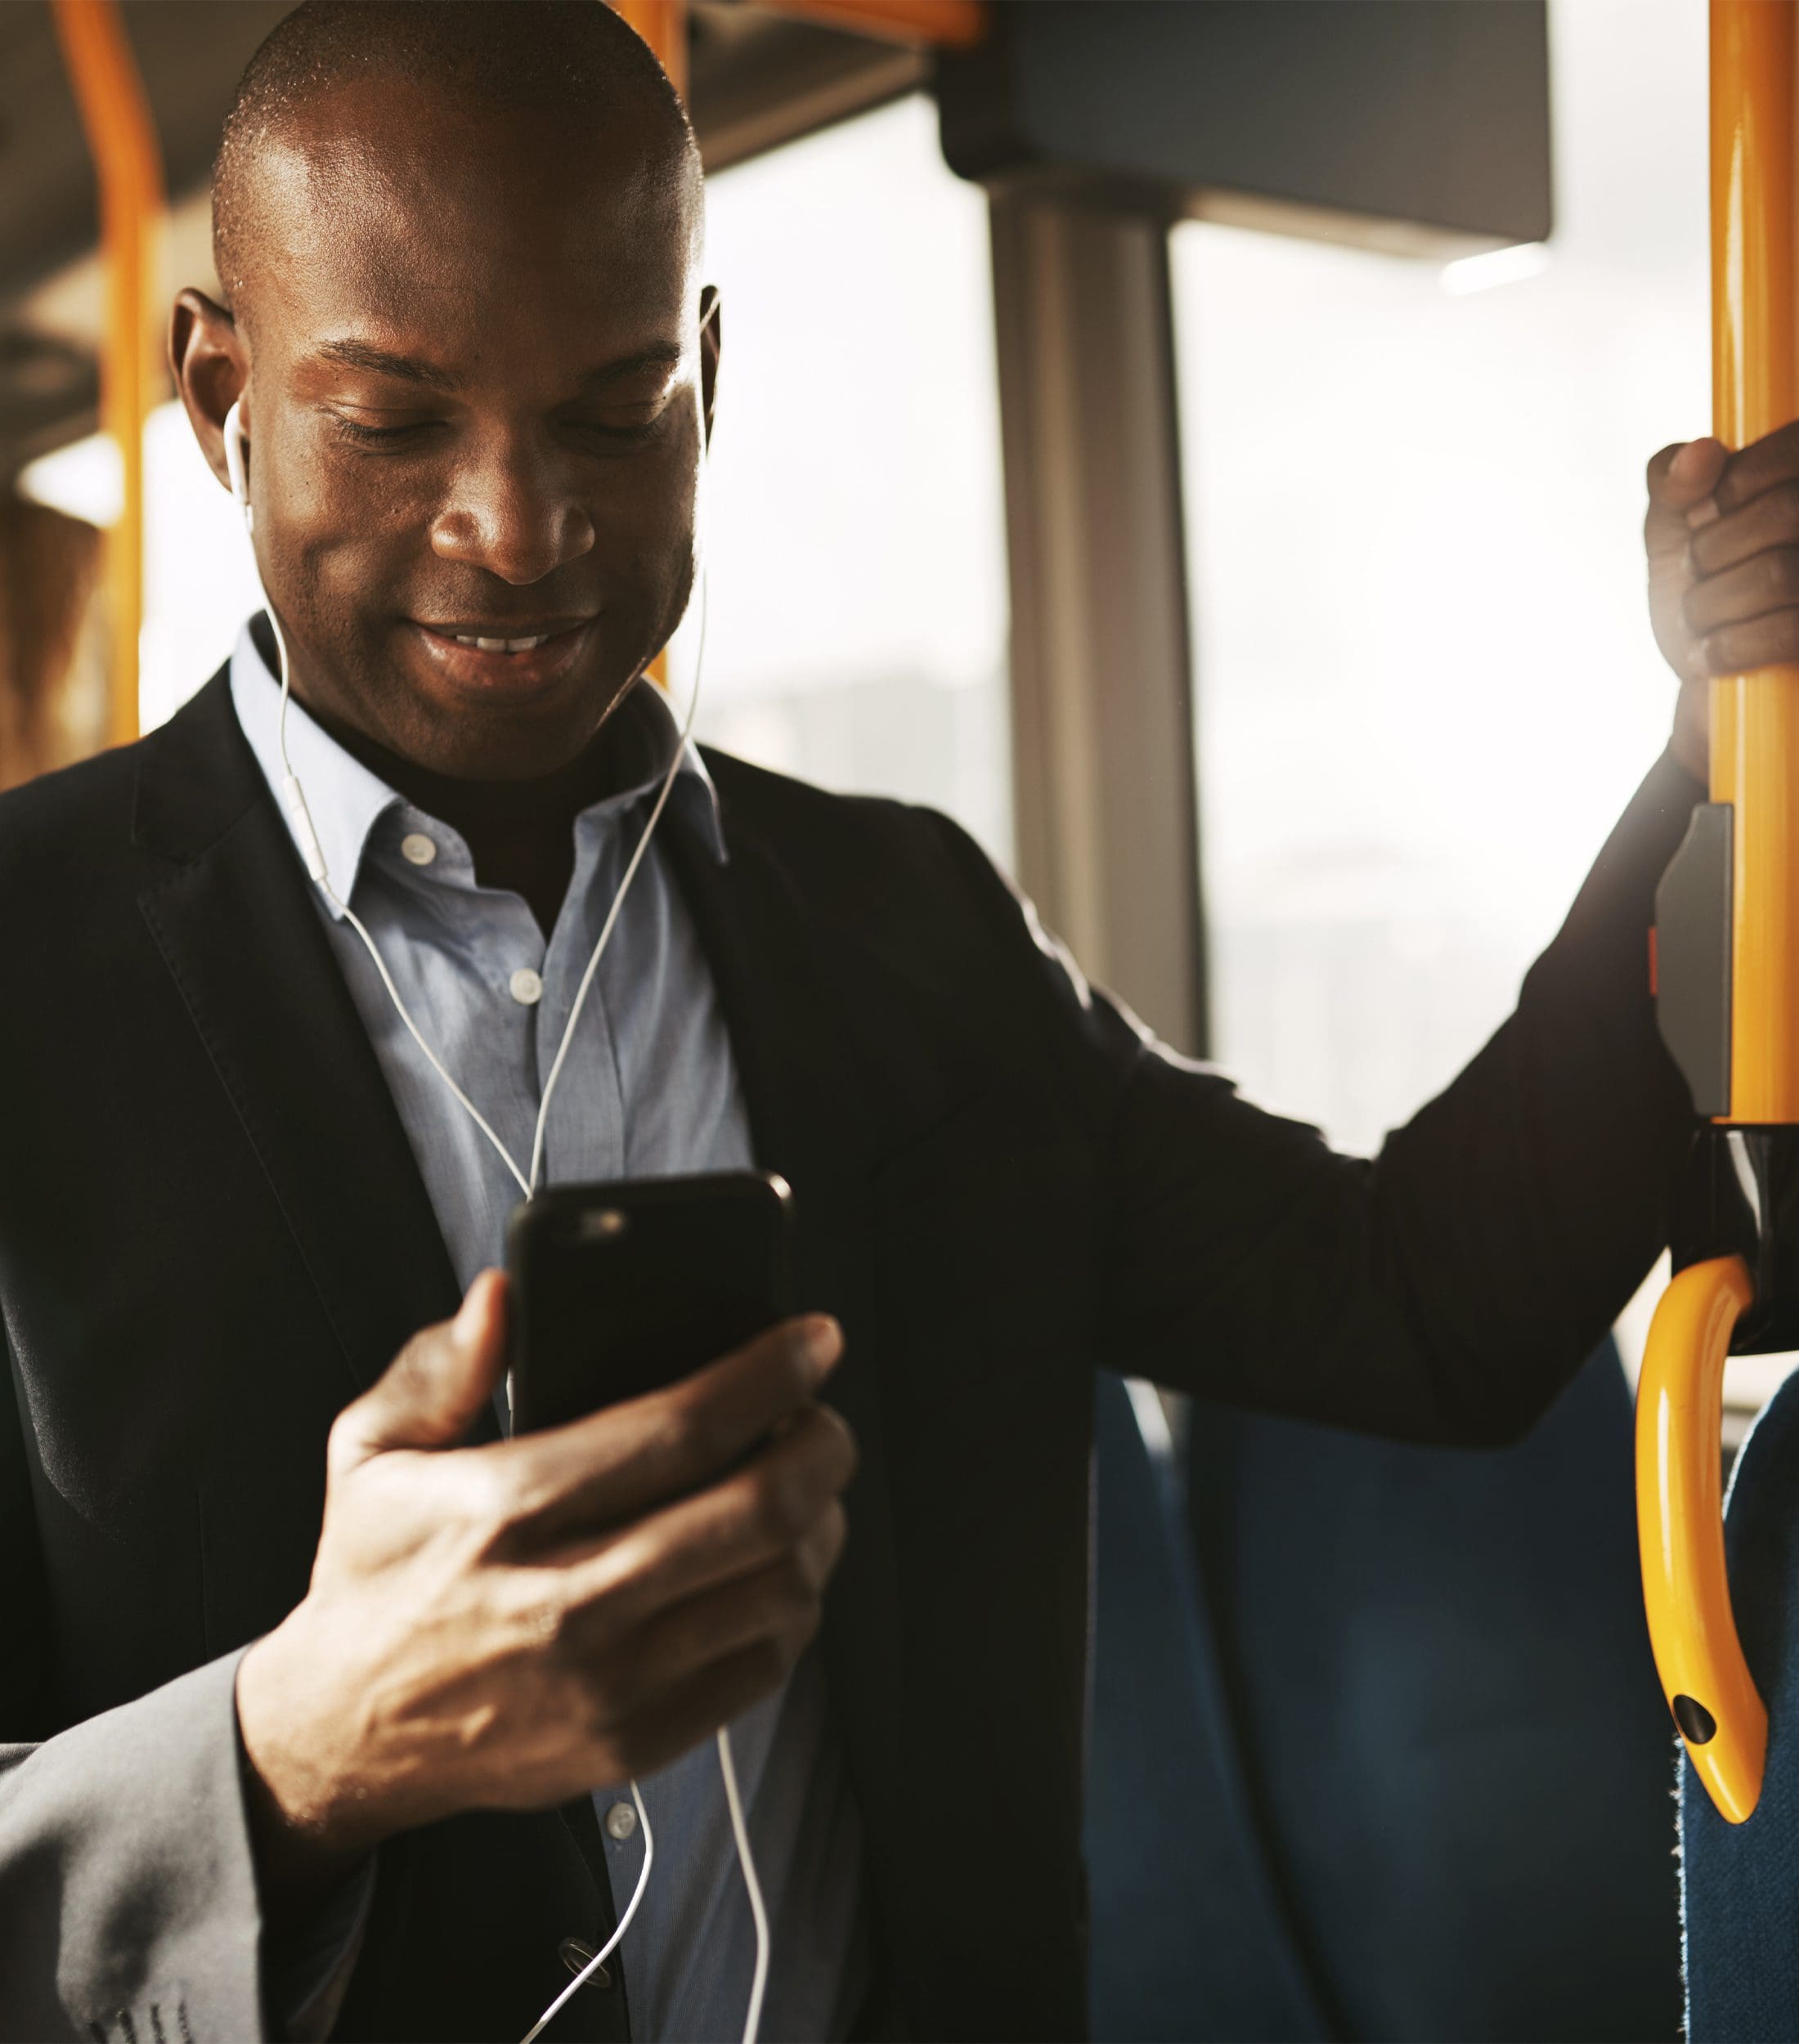 Smiling Businessman Wearing a Suit Standing on a Bus Looking at Smartphone With Earphones